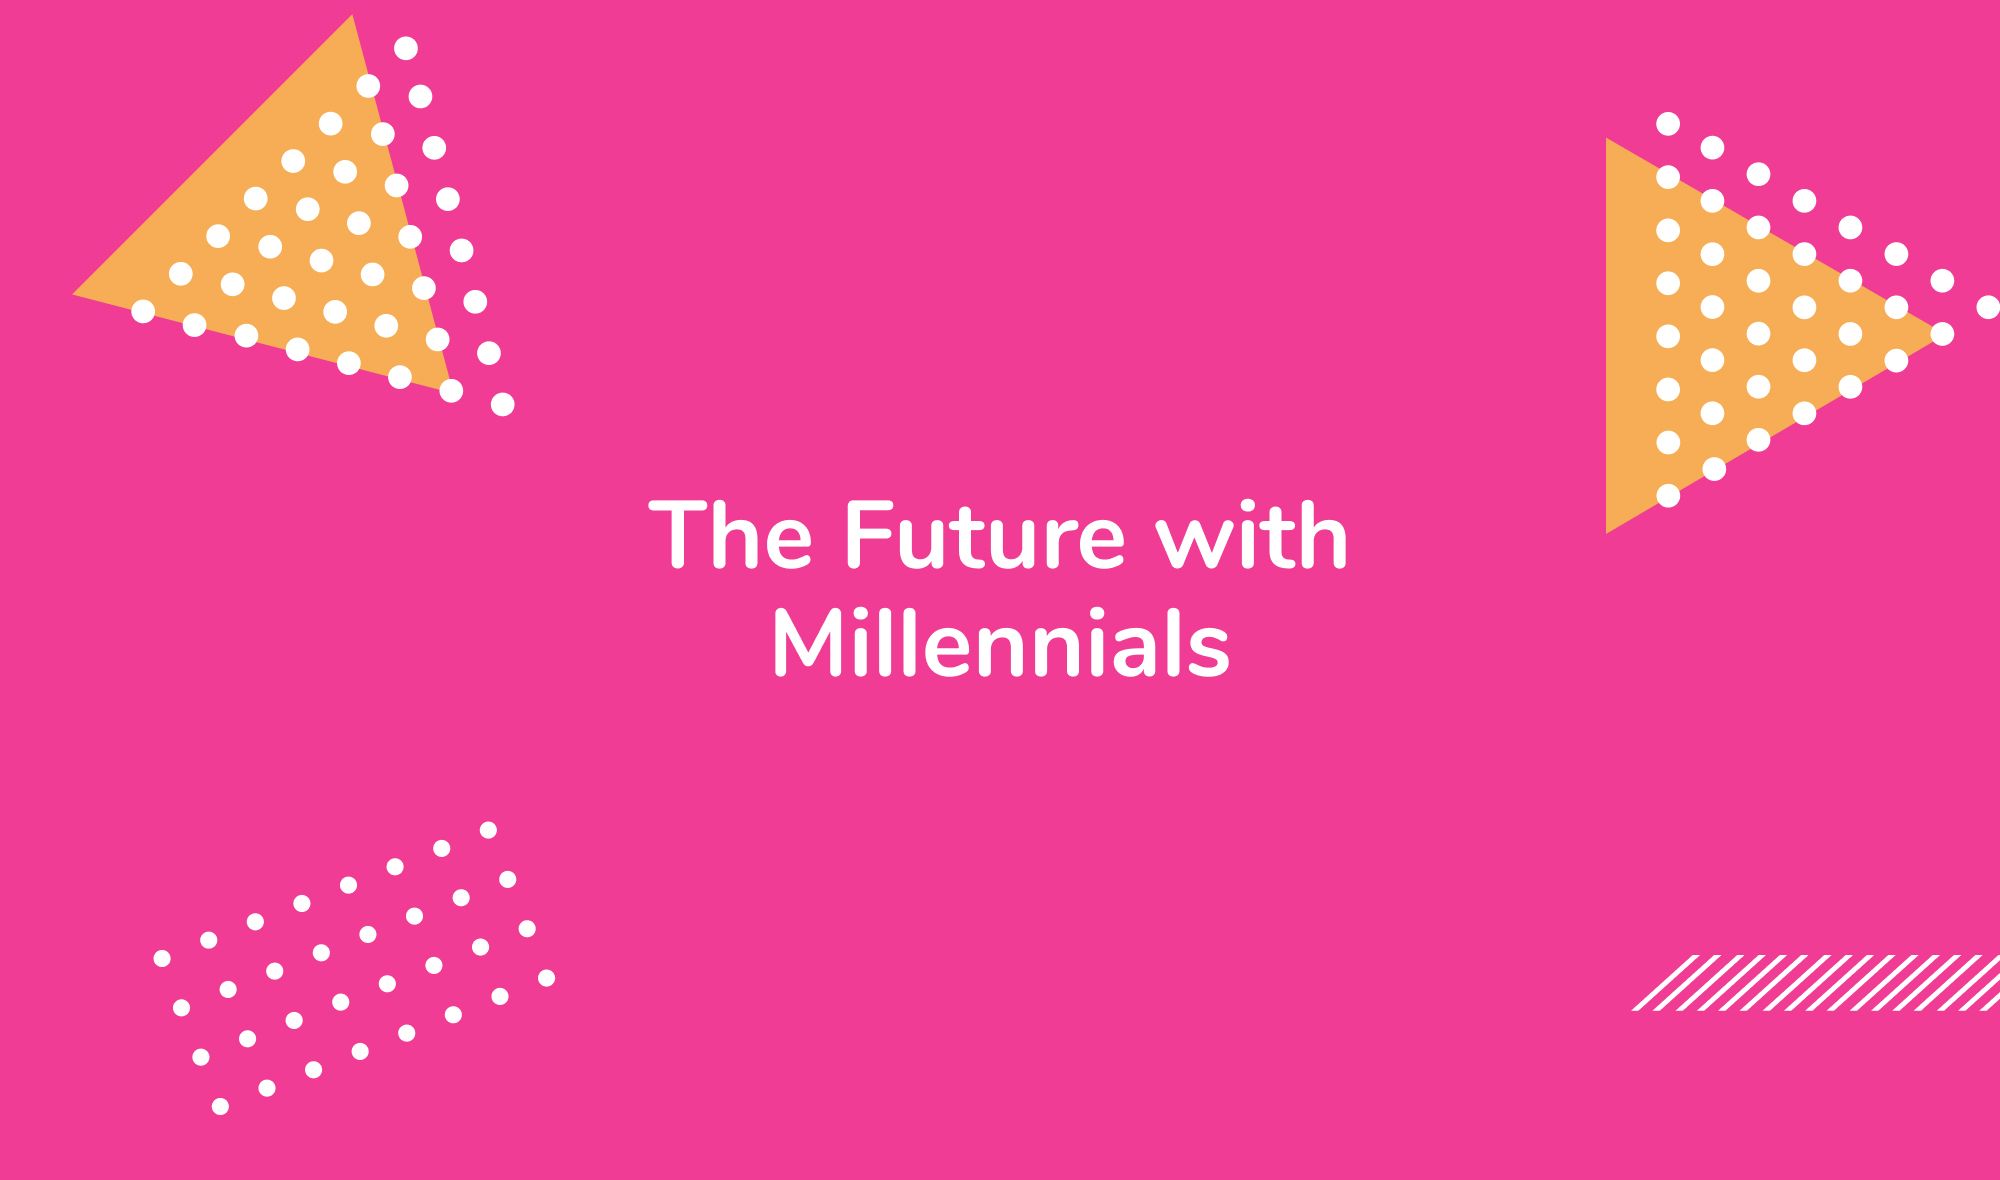 The Future with Millennials